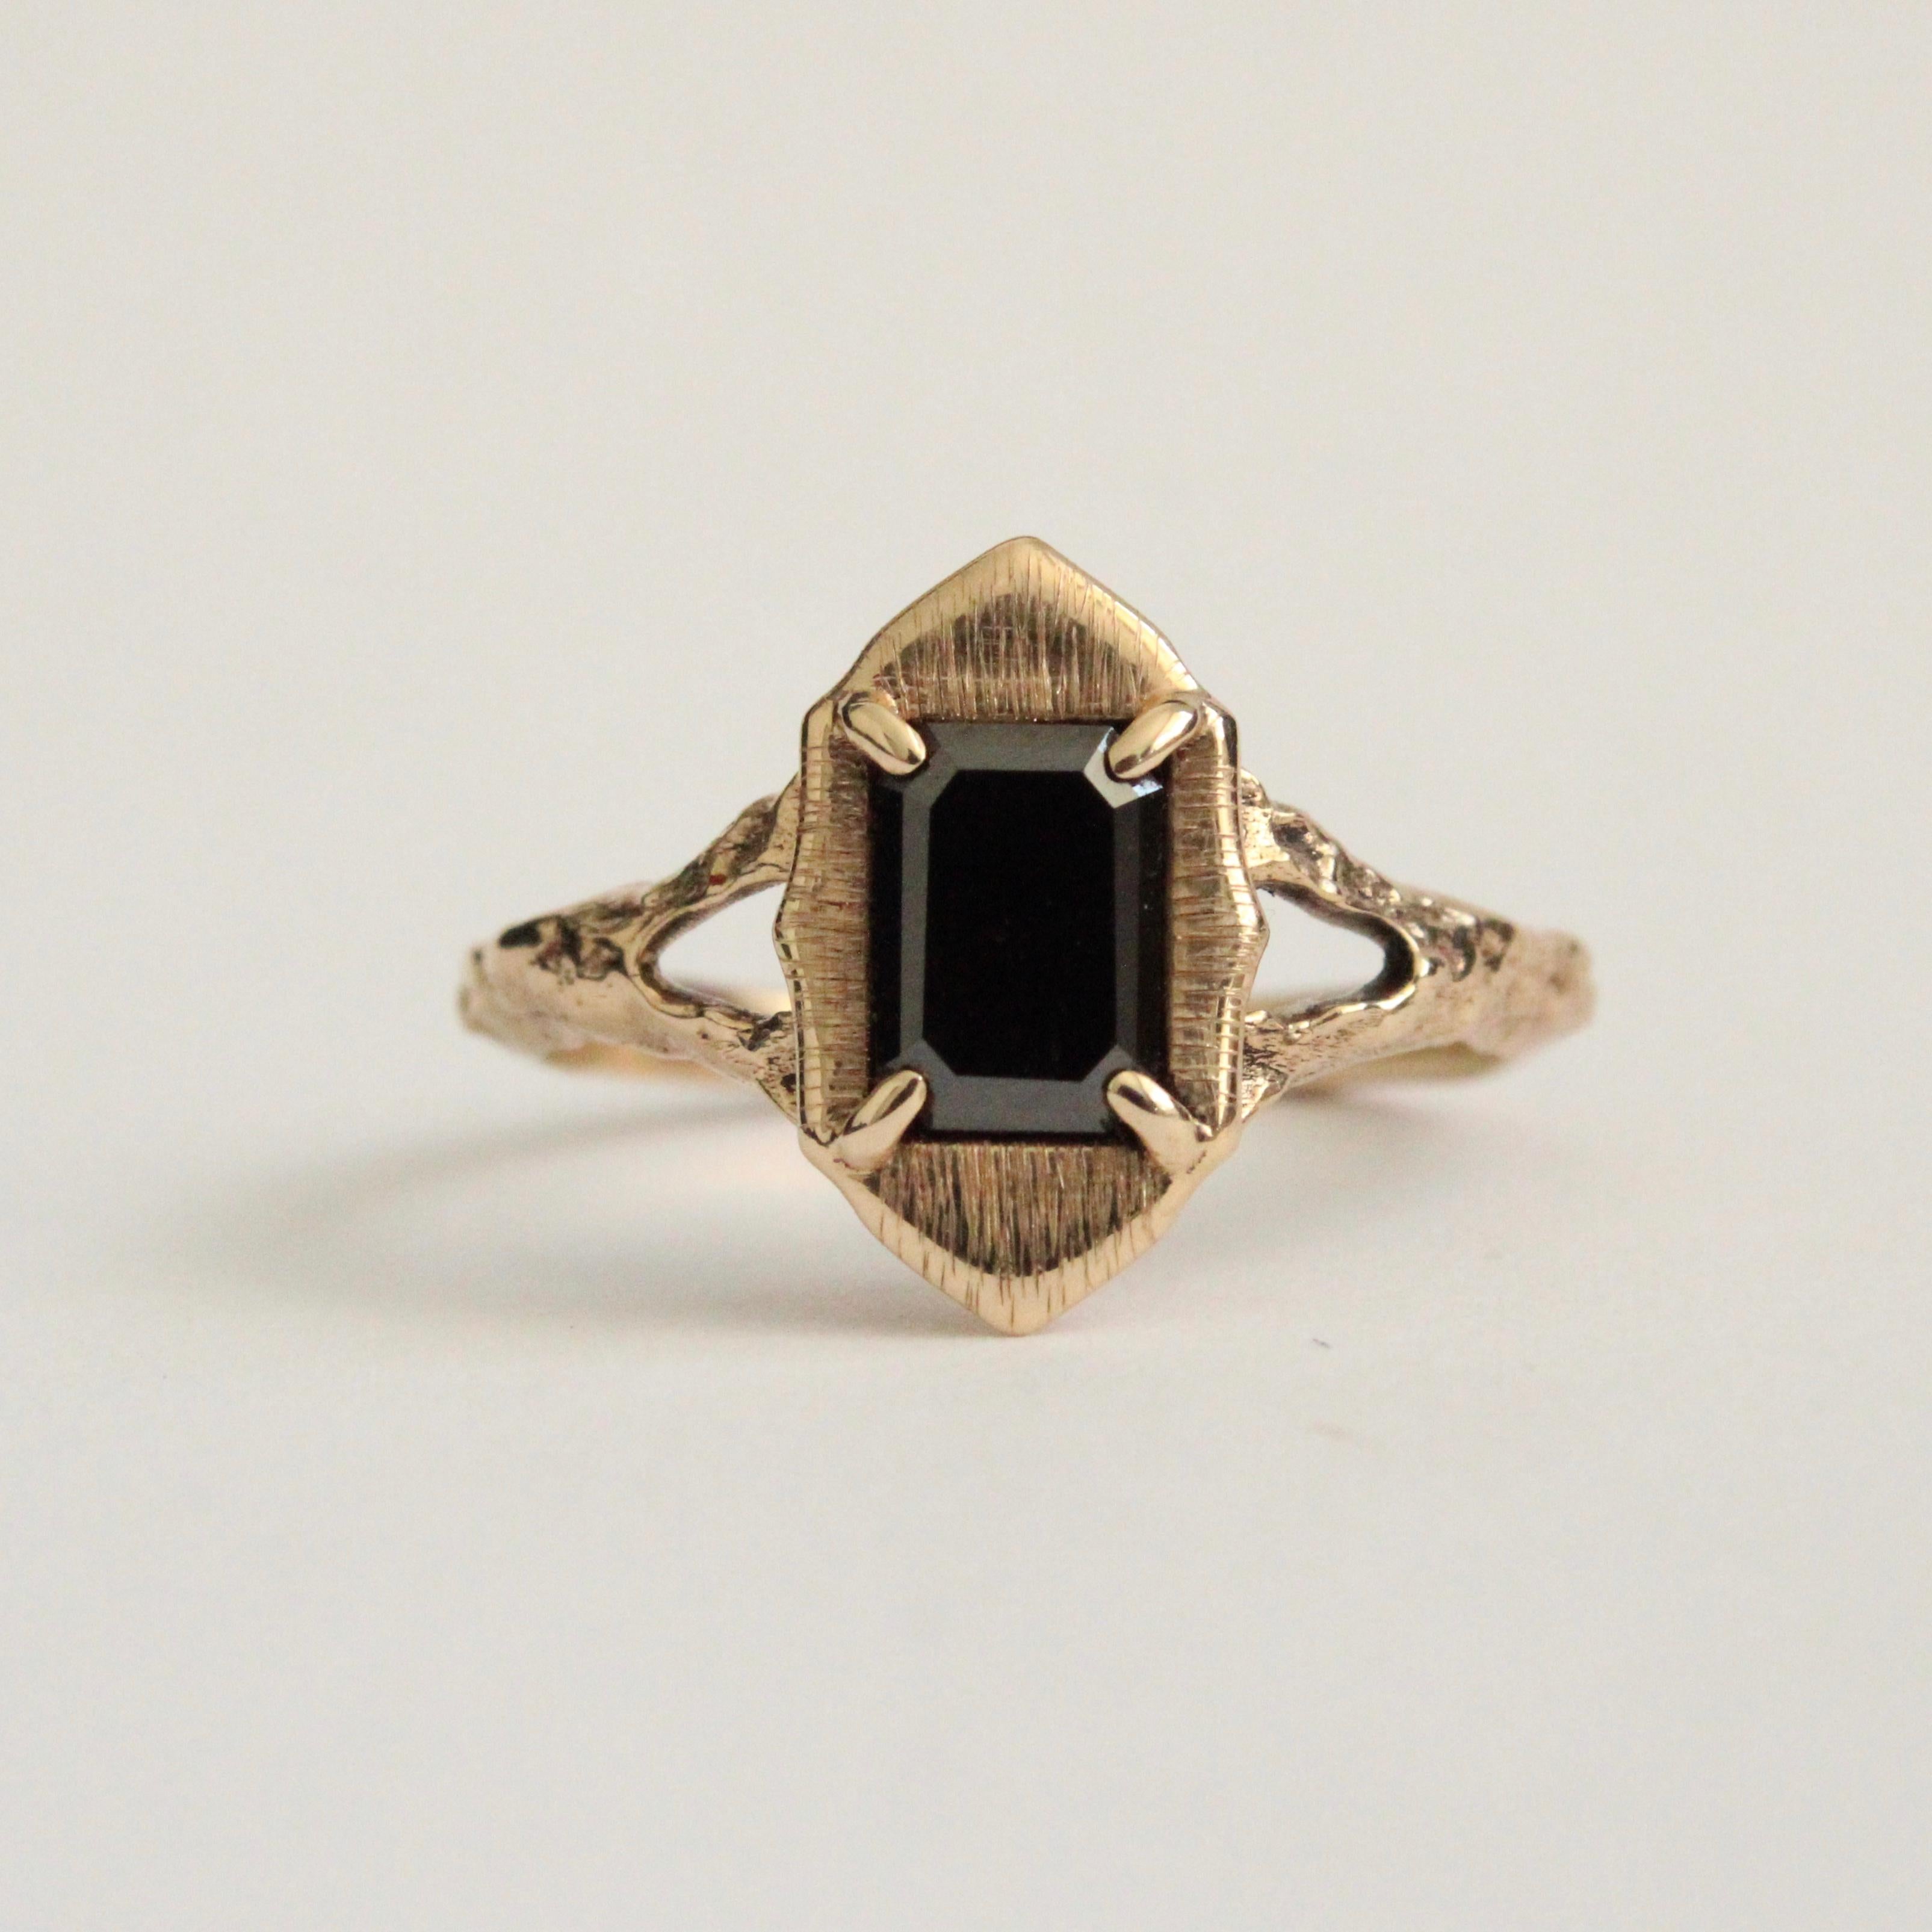 Black diamond ring with a beautiful 7x5mm emerald cut black diamond center stone in 14k yellow gold.  This piece has a beautiful satin halo with a split band. One of a kind size 8. 